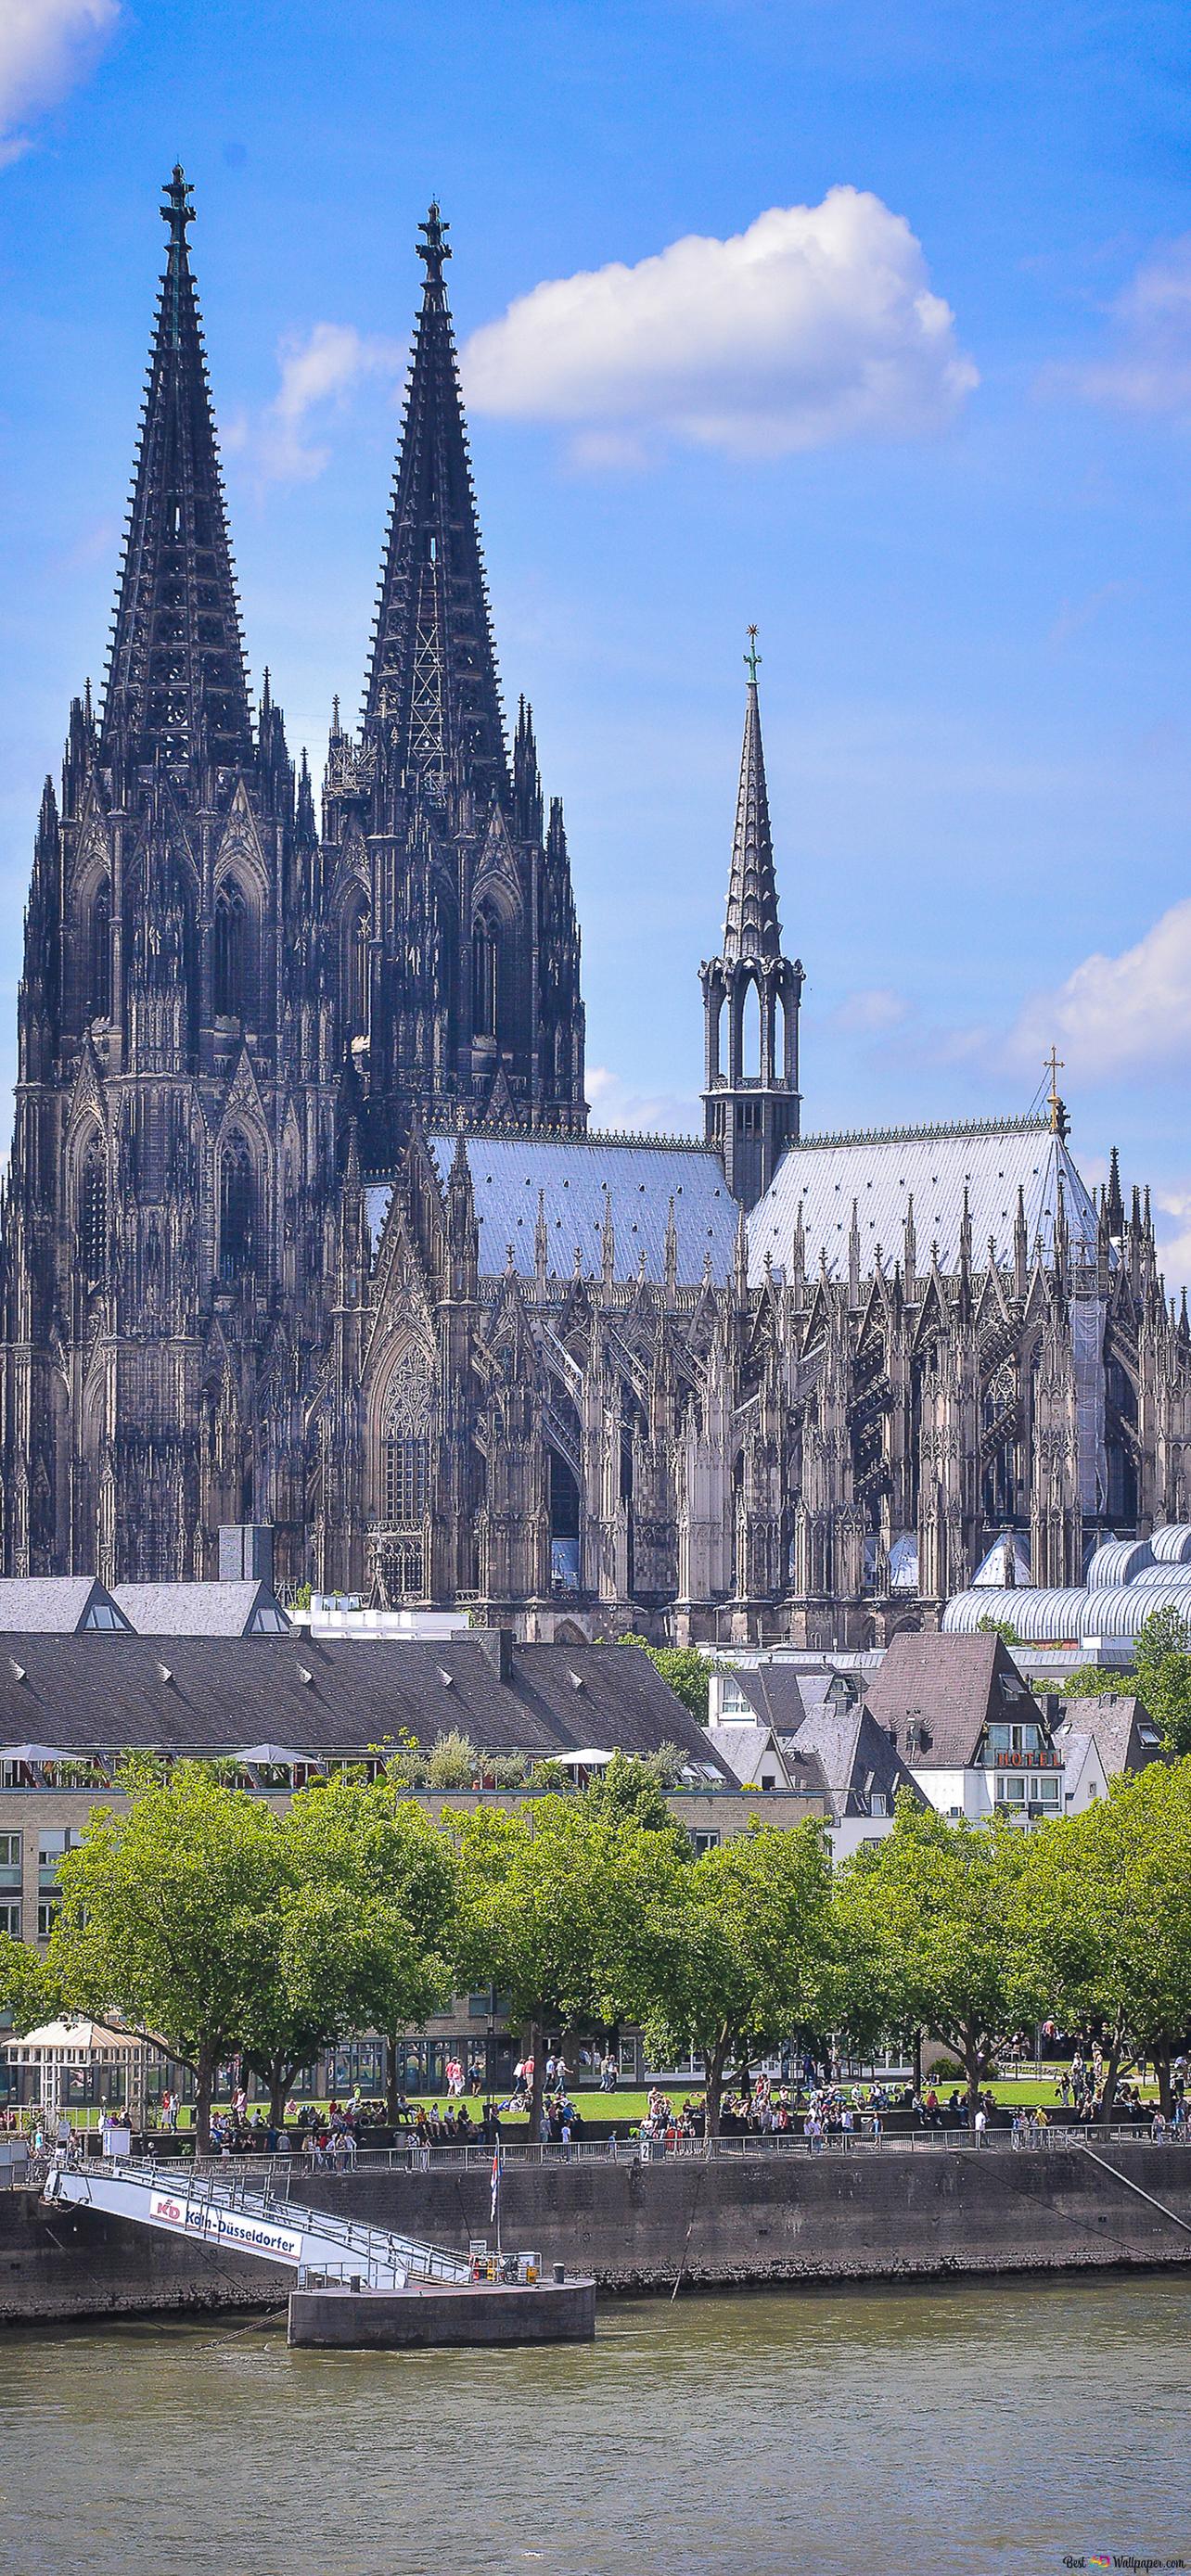 Cologne Cathedral and the Rhine river in Cologne, Germany HD wallpaper download